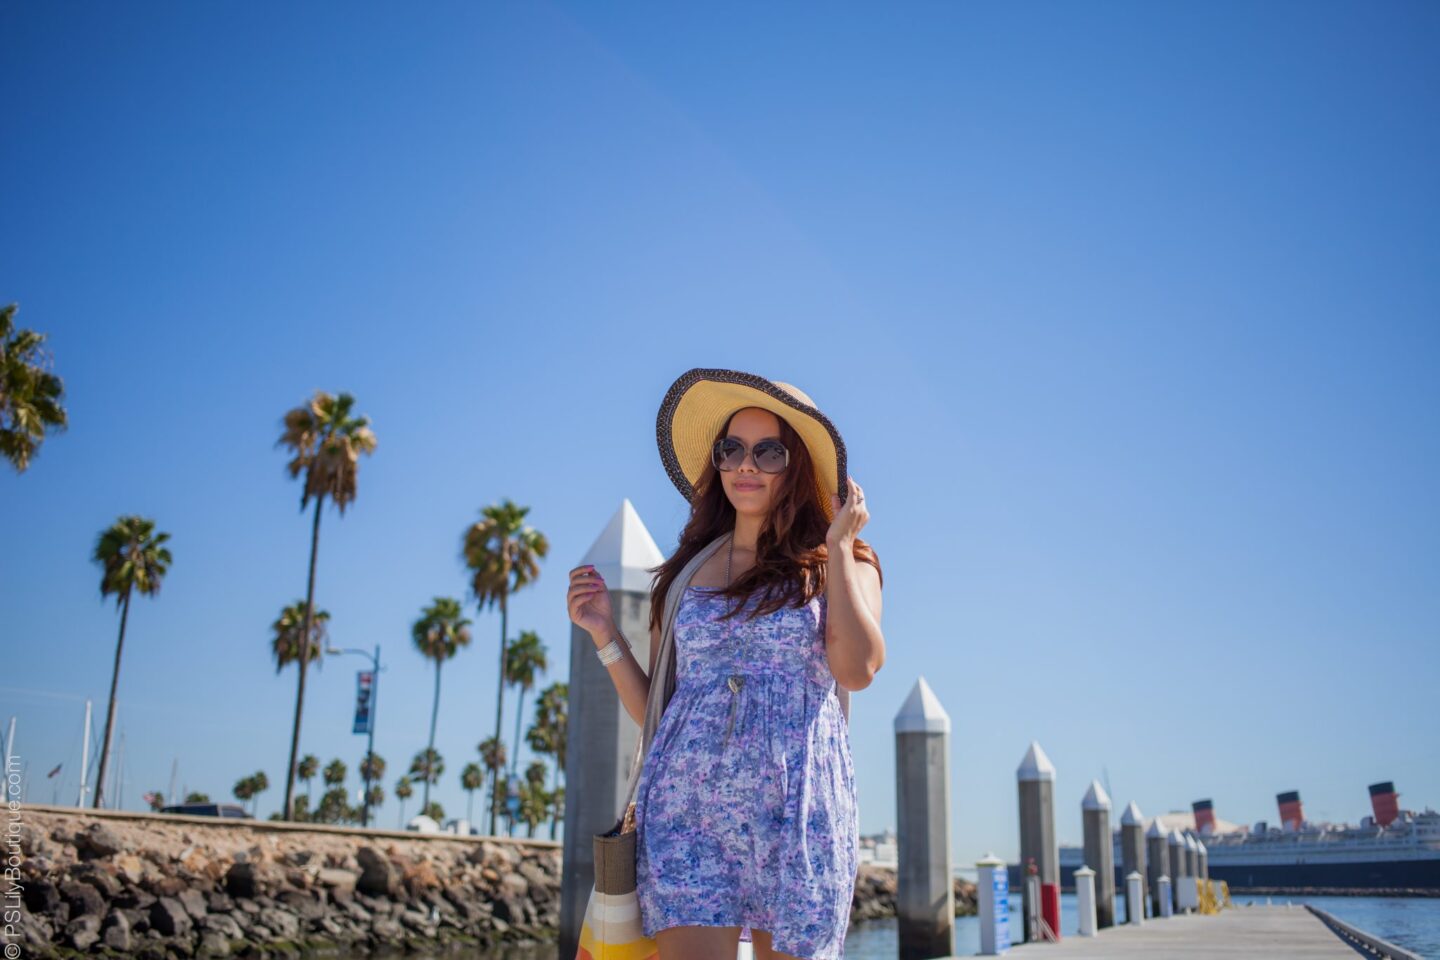 instagram-pslilyboutique-los-angeles-fashion-blogger-palm-trees-vintage-sunglasses-summer-fall-2015-vacation-travel-outfit-ideas-